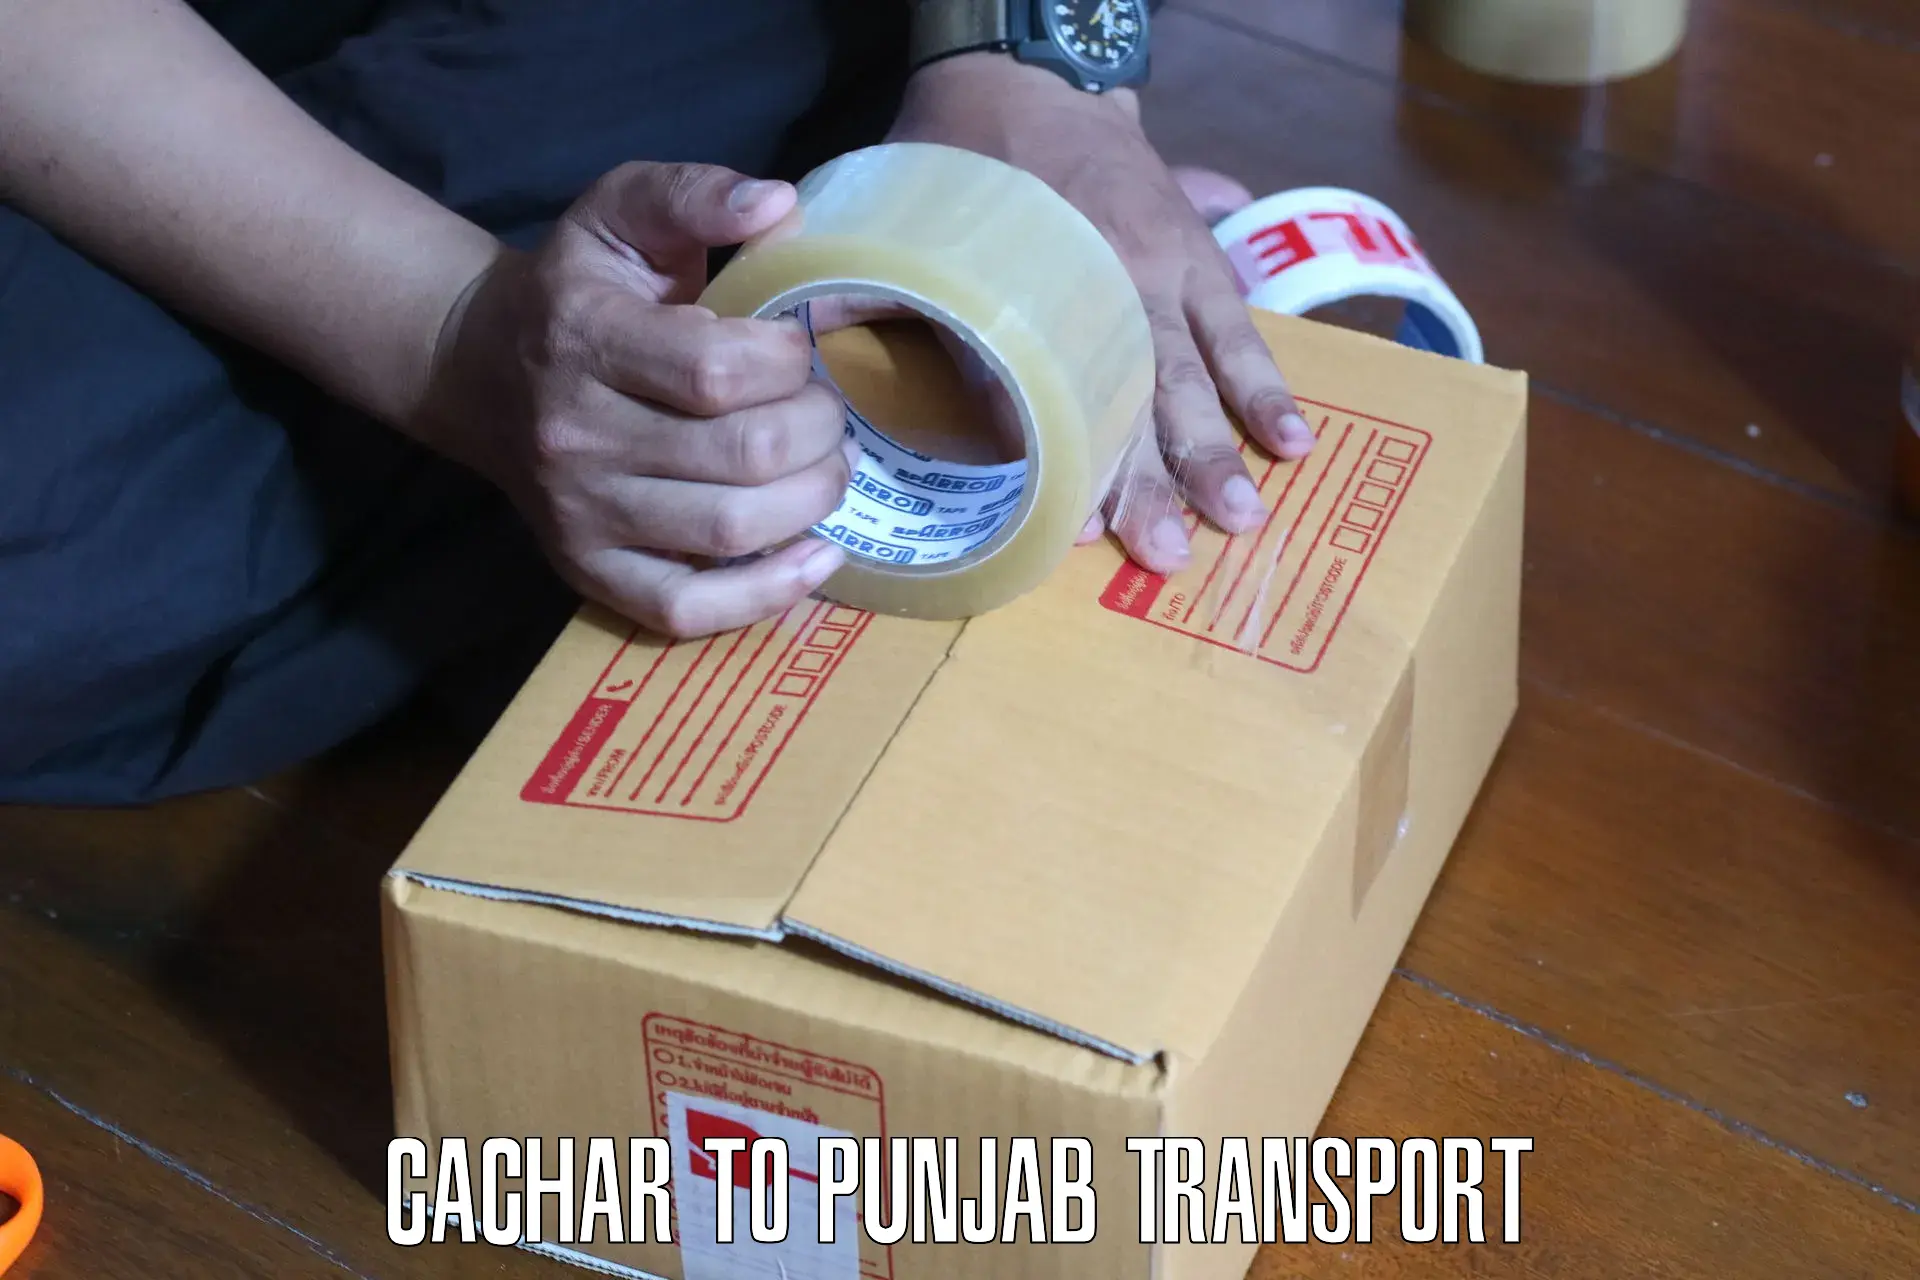 Delivery service Cachar to Bagha Purana